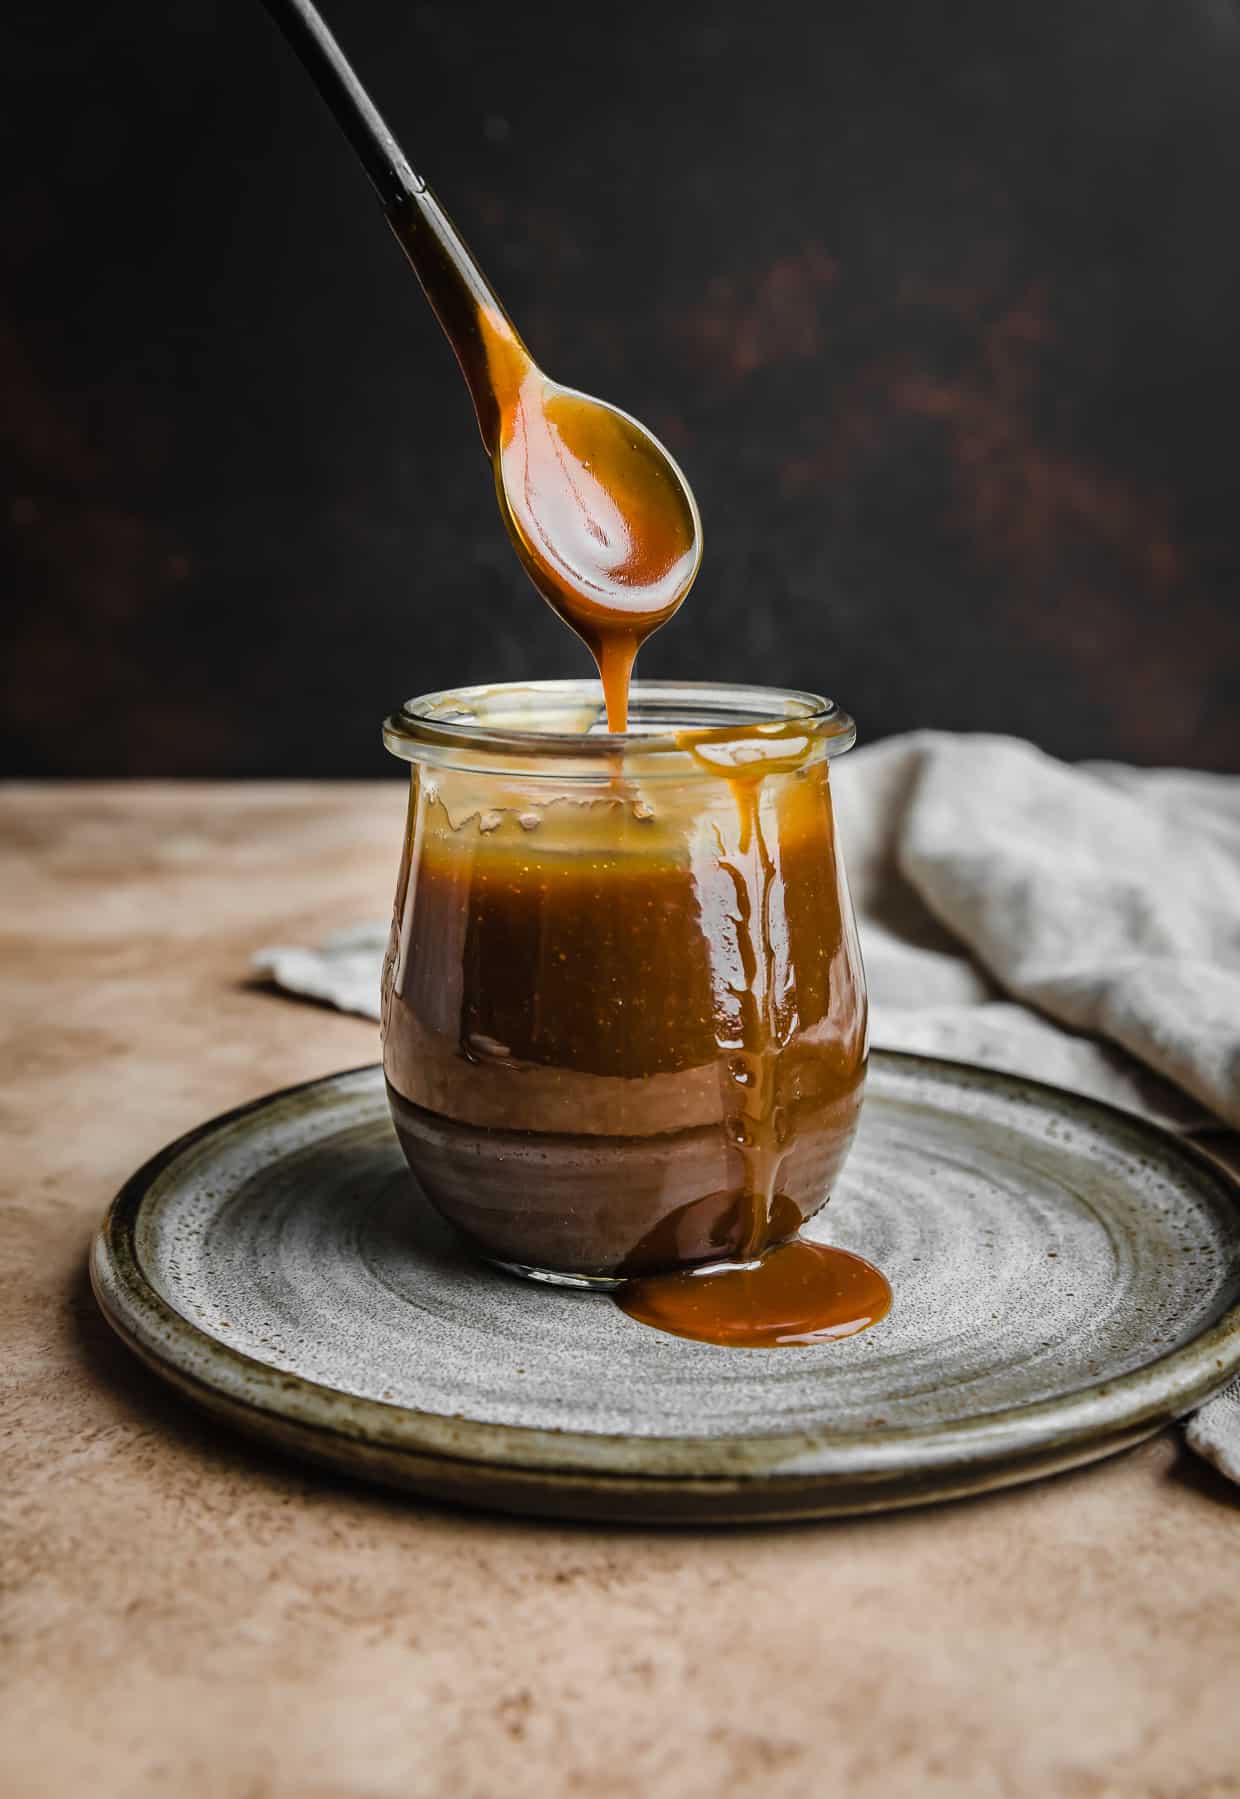 A spoon lifting out Salted Butterscotch topping from a small glass jar, against a dark brown background.